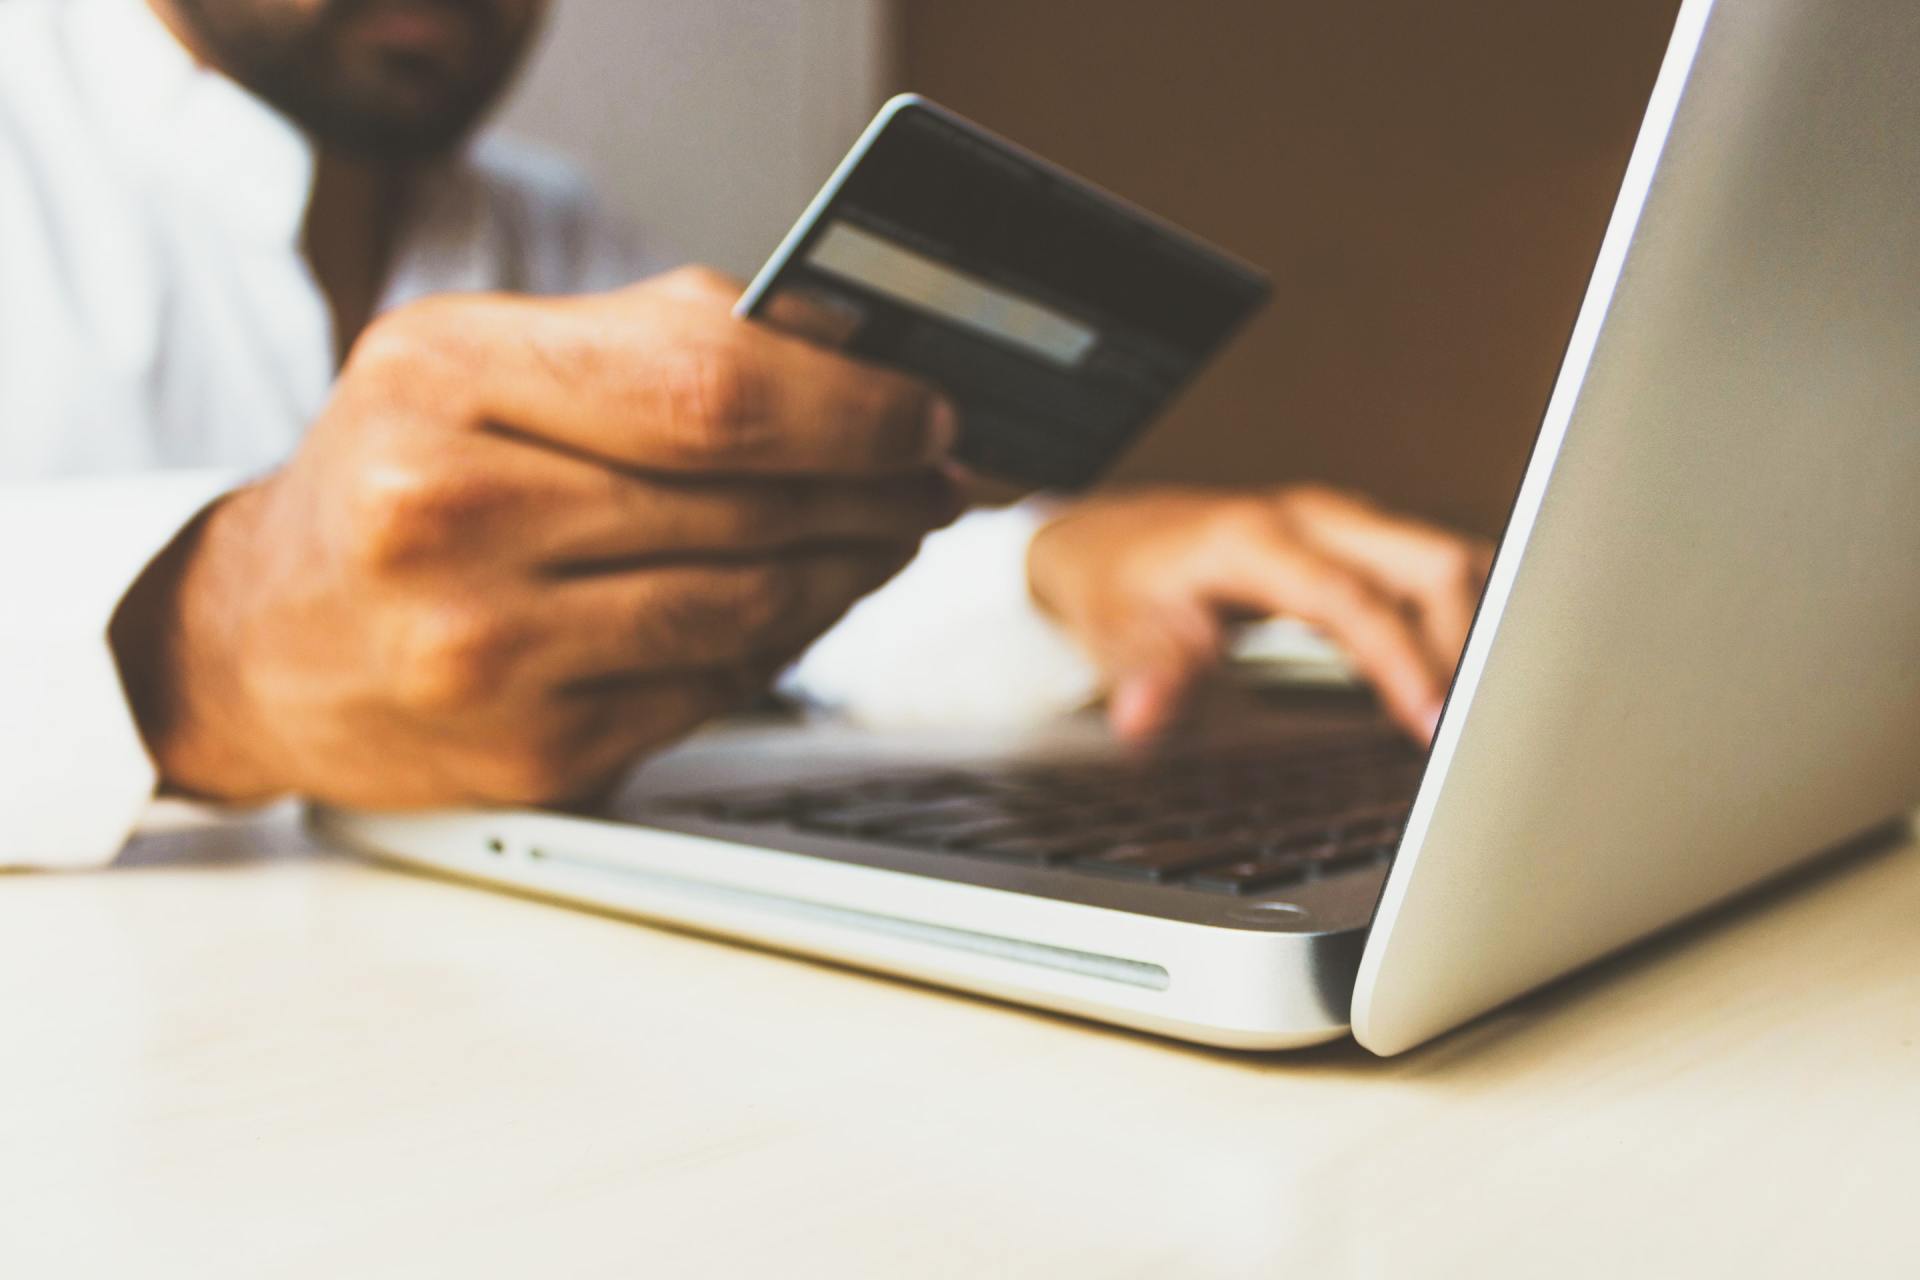 WSI Digital Marketing in Colorado ecommerce - Man making online purchase with credit card